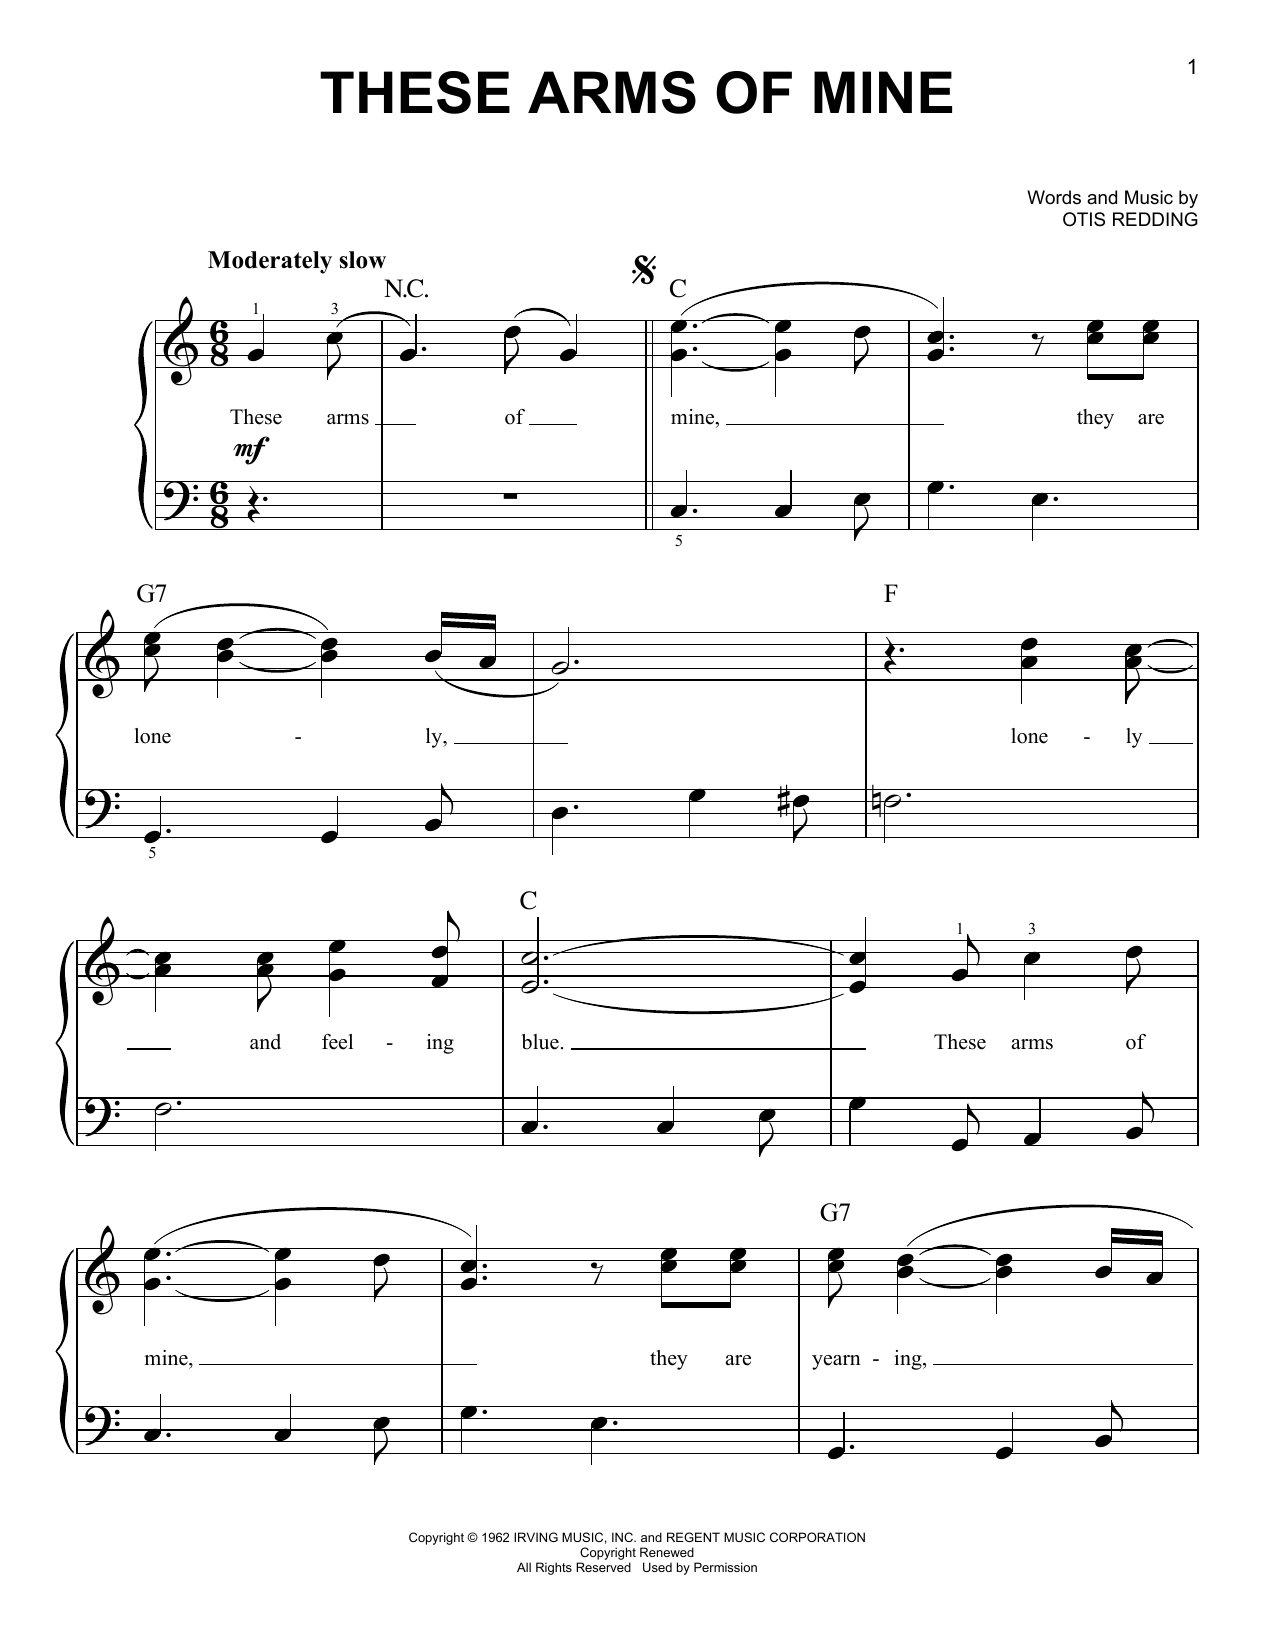 Download Otis Redding These Arms Of Mine Sheet Music